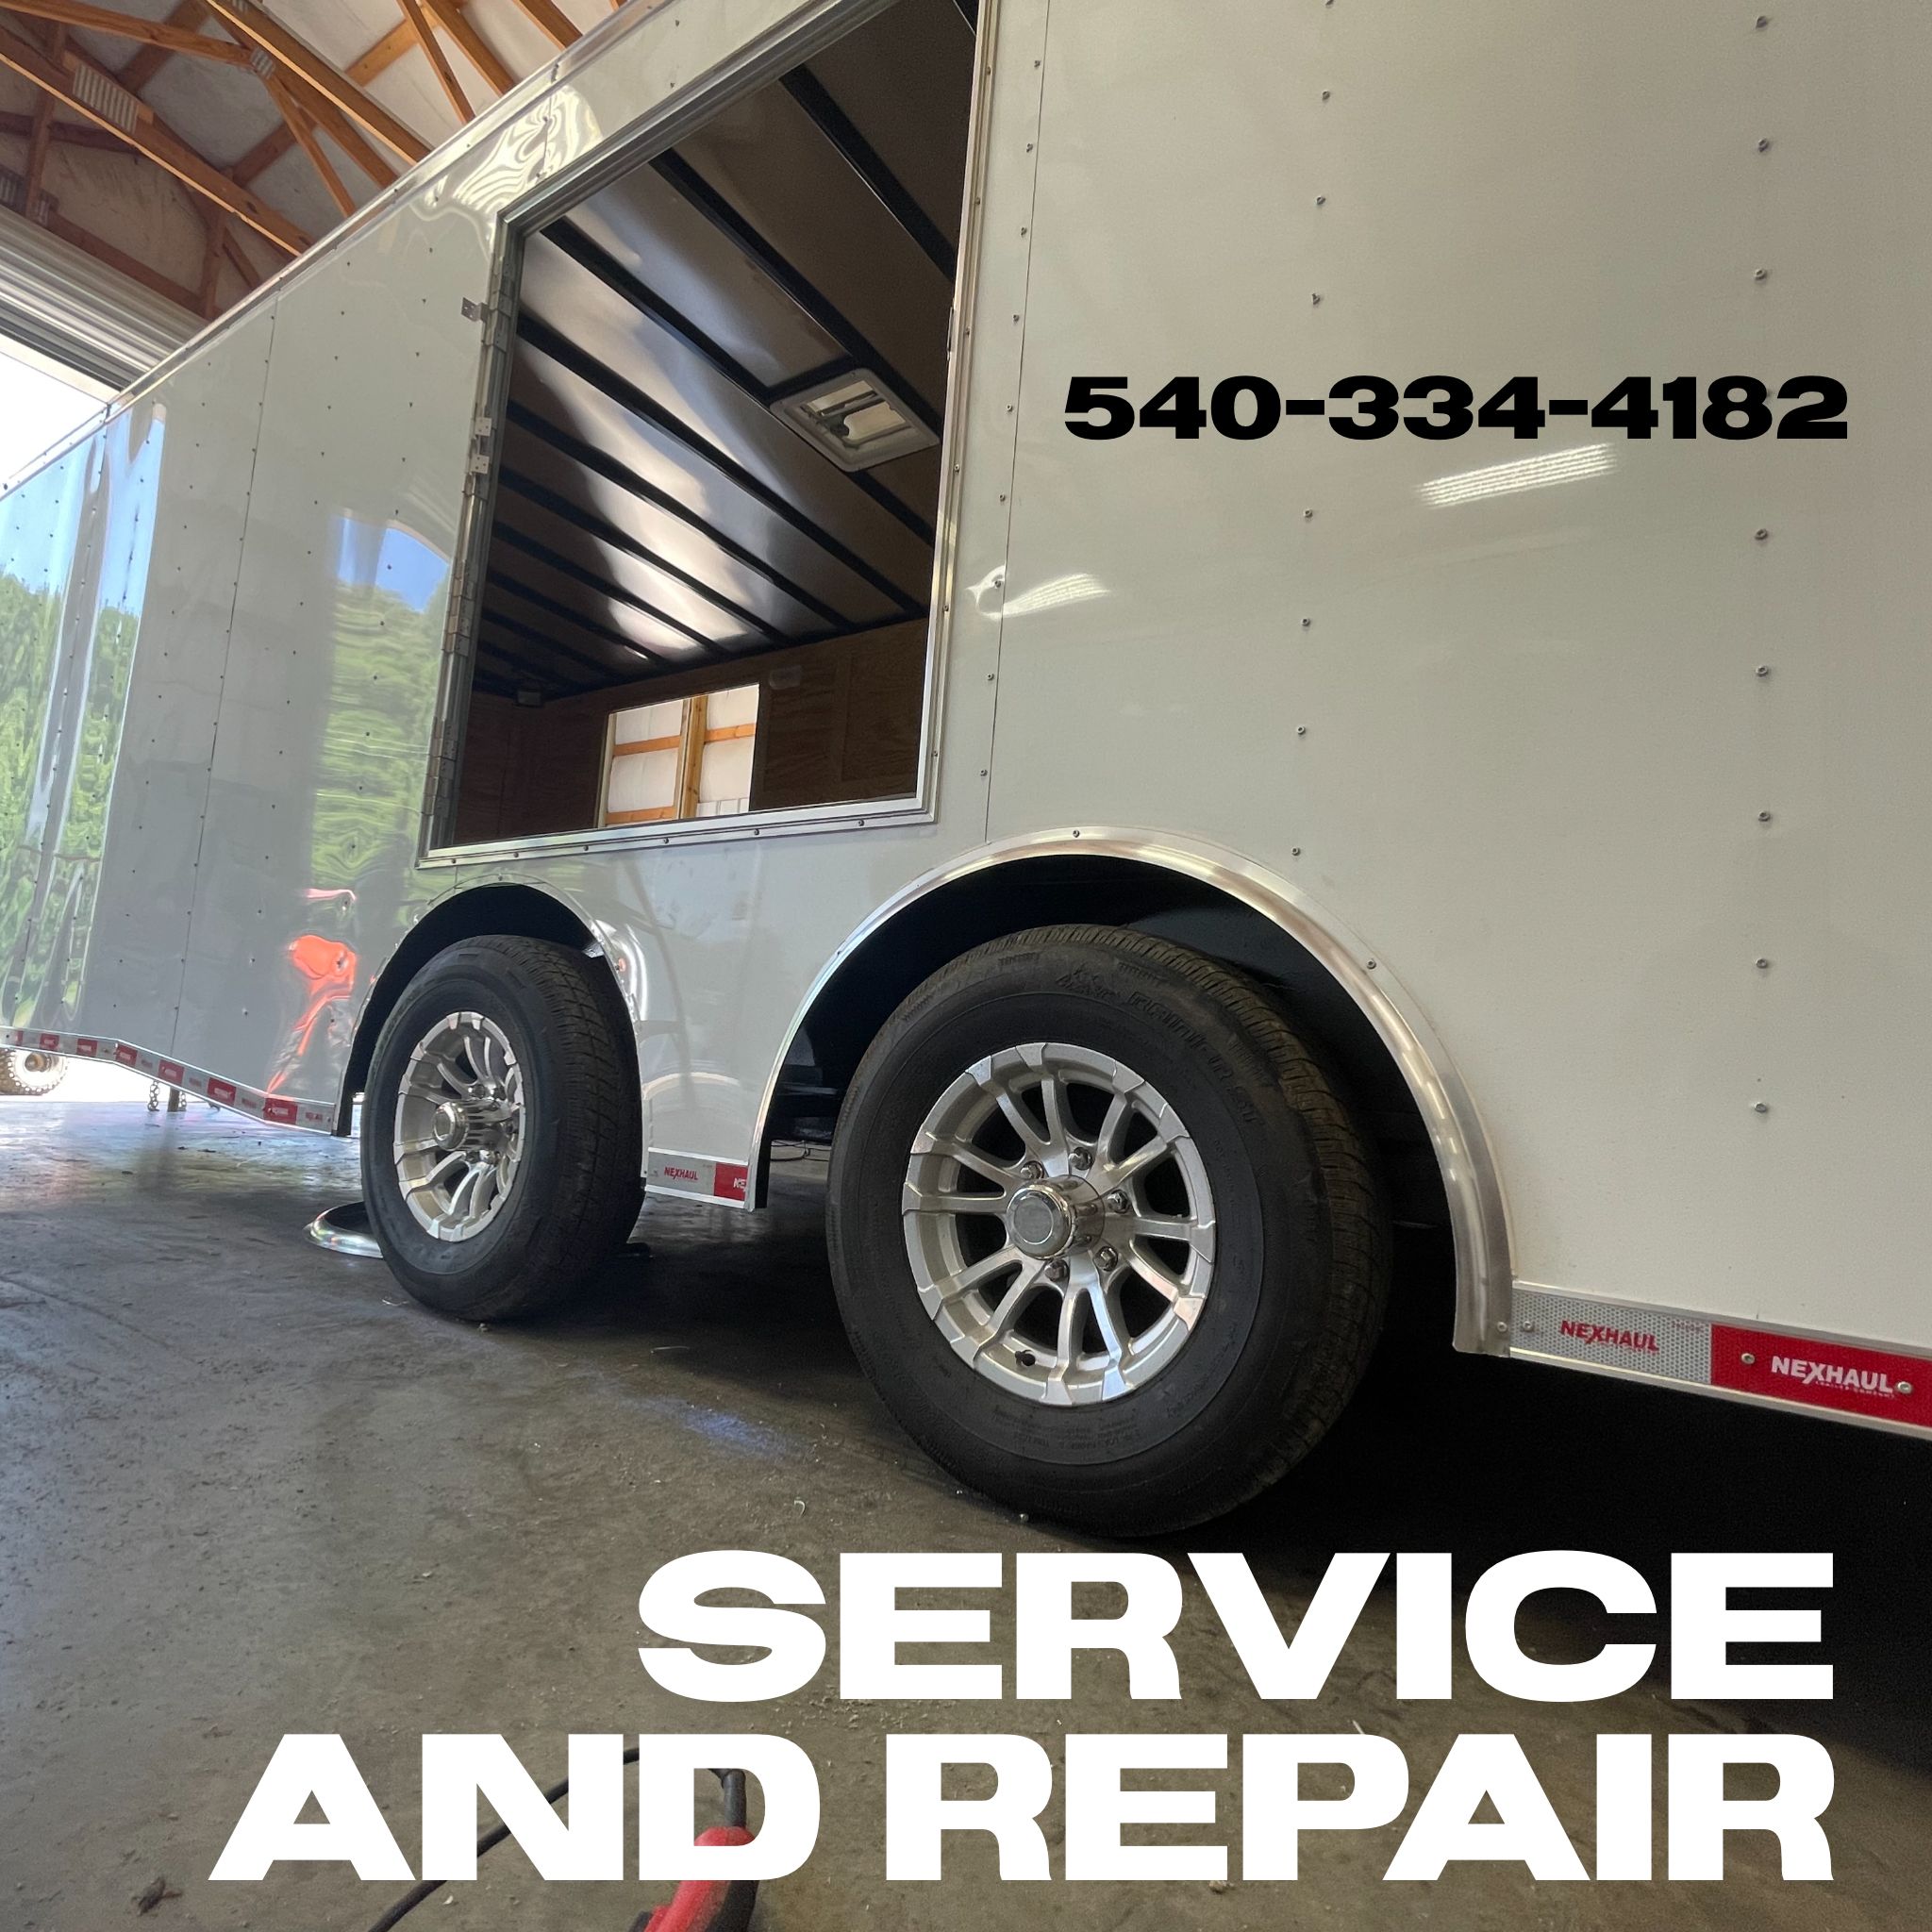 Read more about the article Trailer Collision Repair & Parts Solutions at Pro-line Trailers